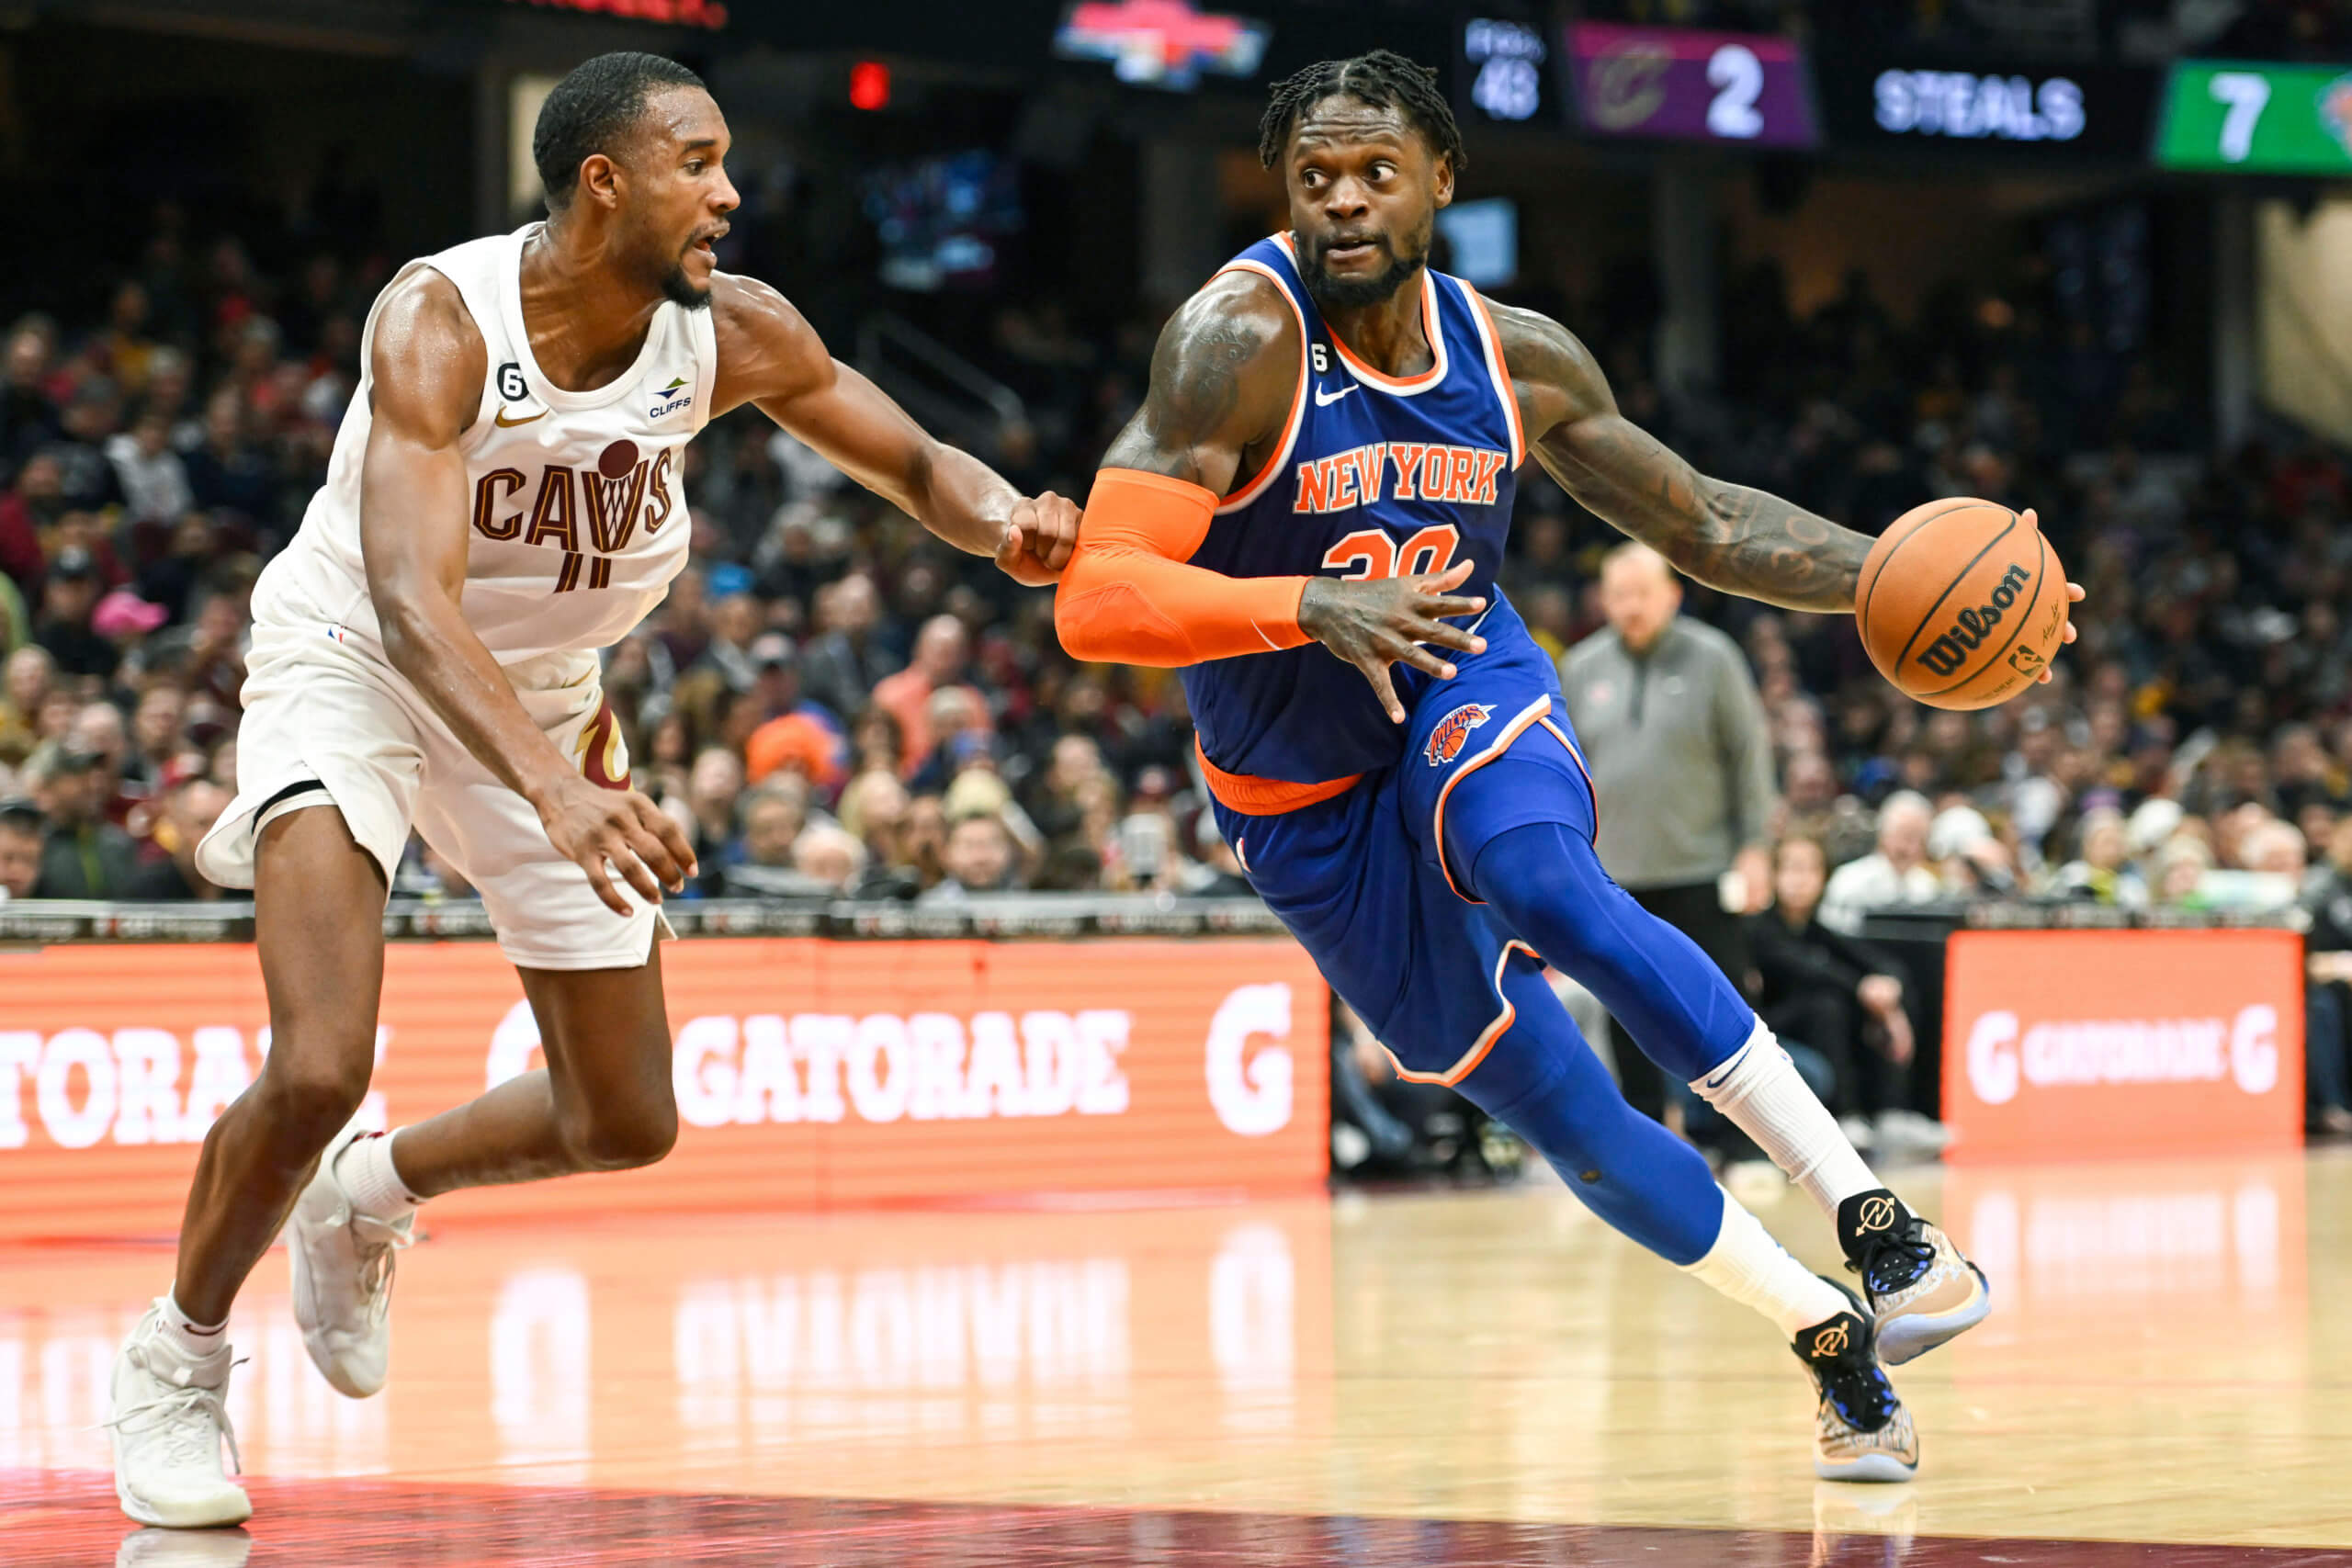 Cavs Players React To Sleeved Jerseys After Tough Game Vs. New York Knicks